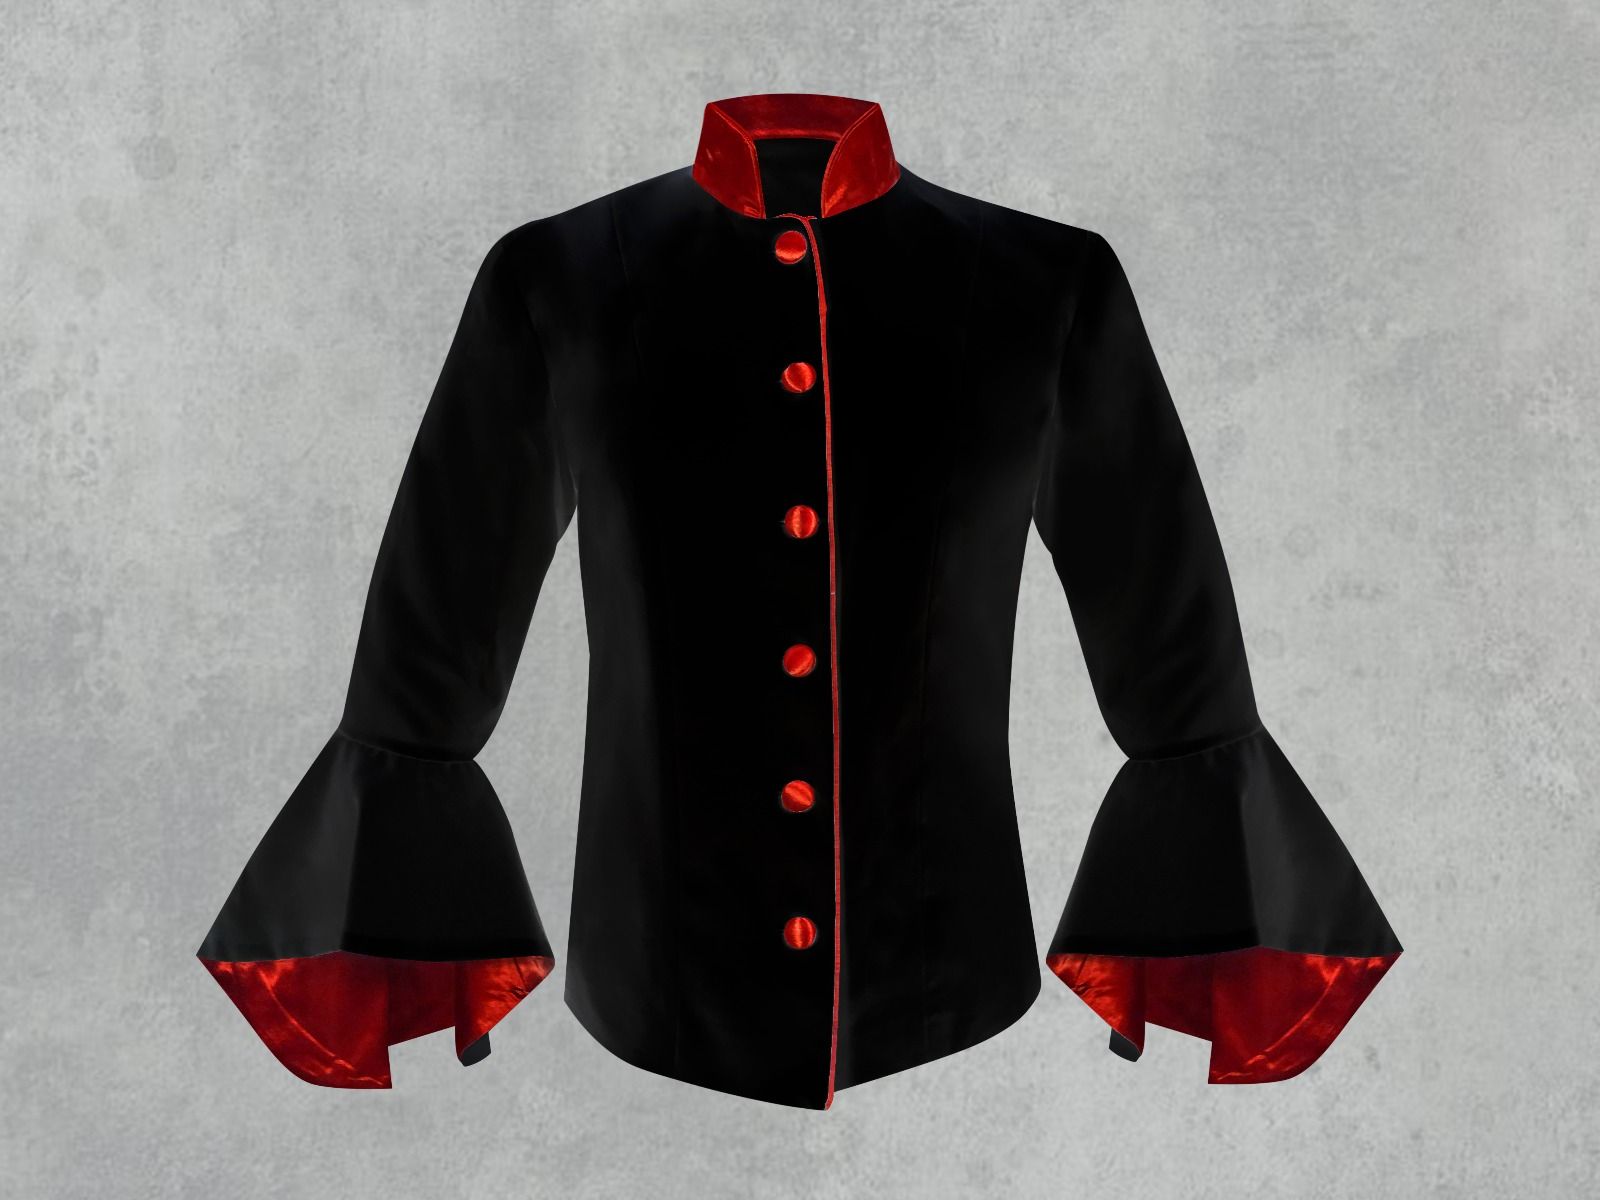 Black and Red Clergy Jacket for Women